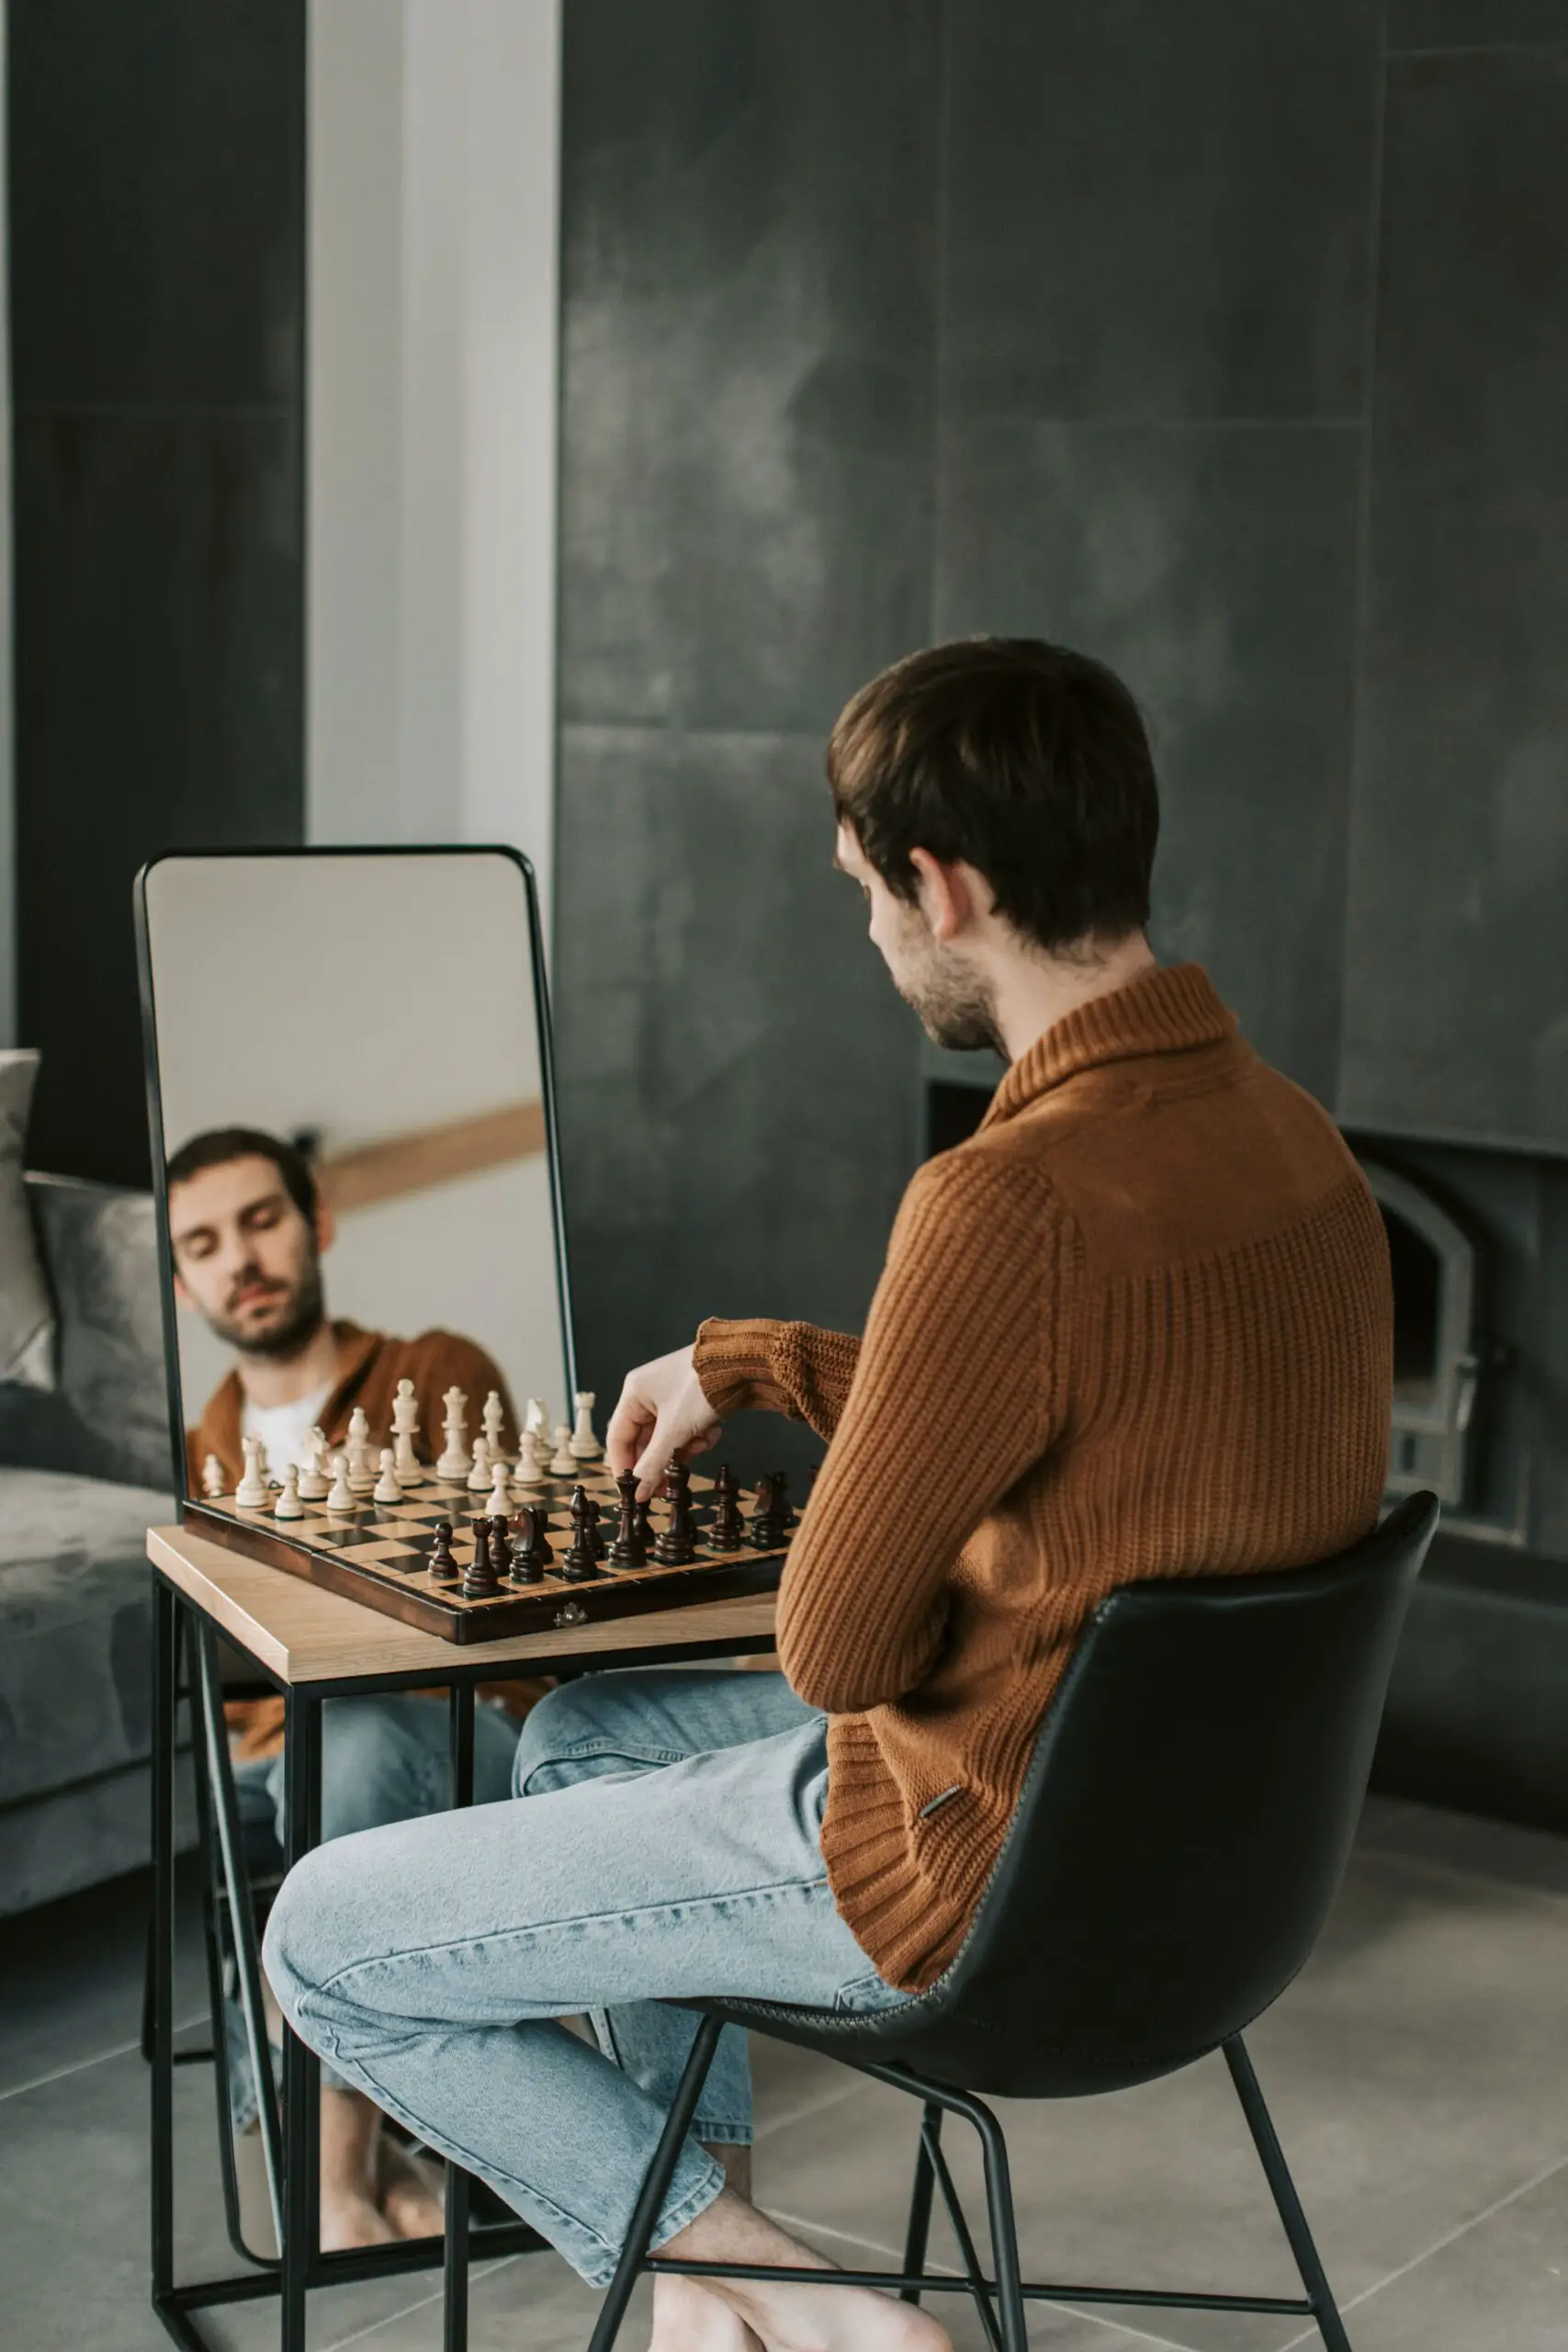 How Does Chess.com Detect Cheating